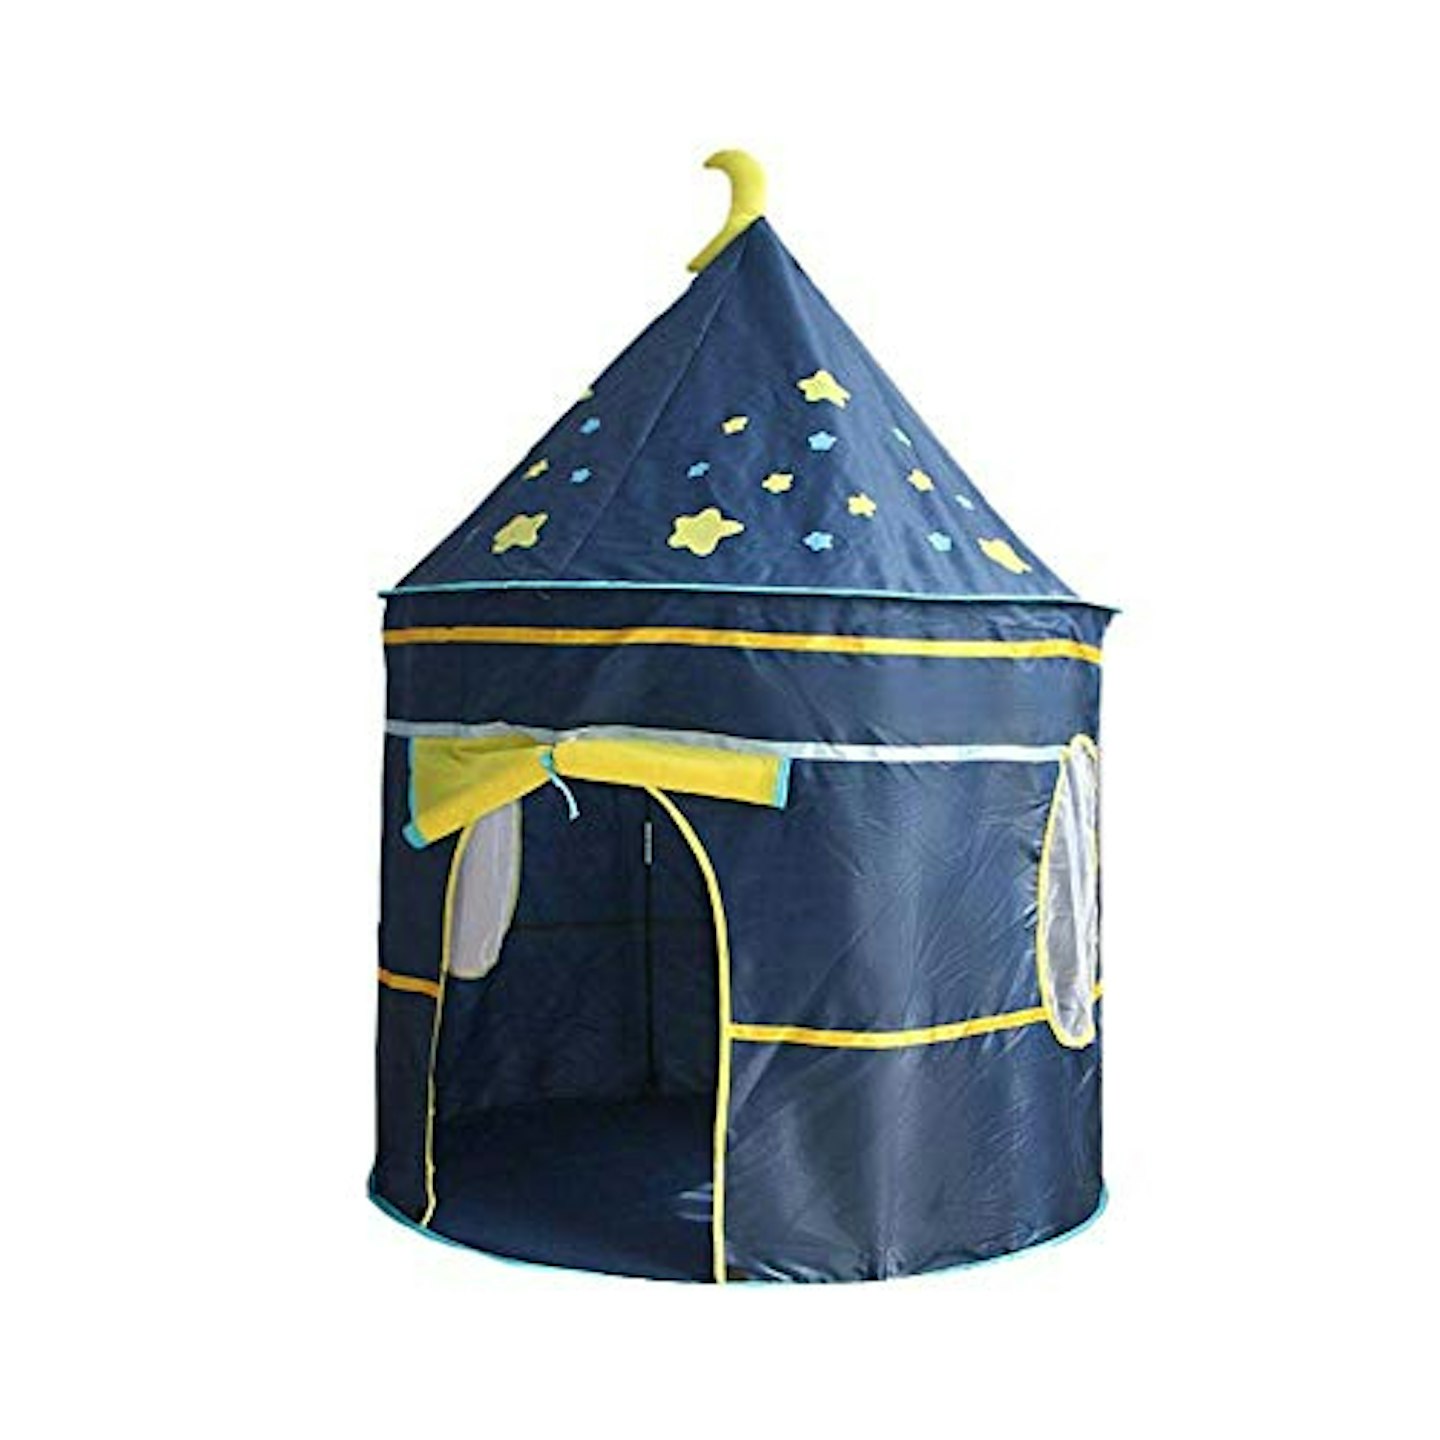 Childrens Teepee Play Tent With Floor Mat